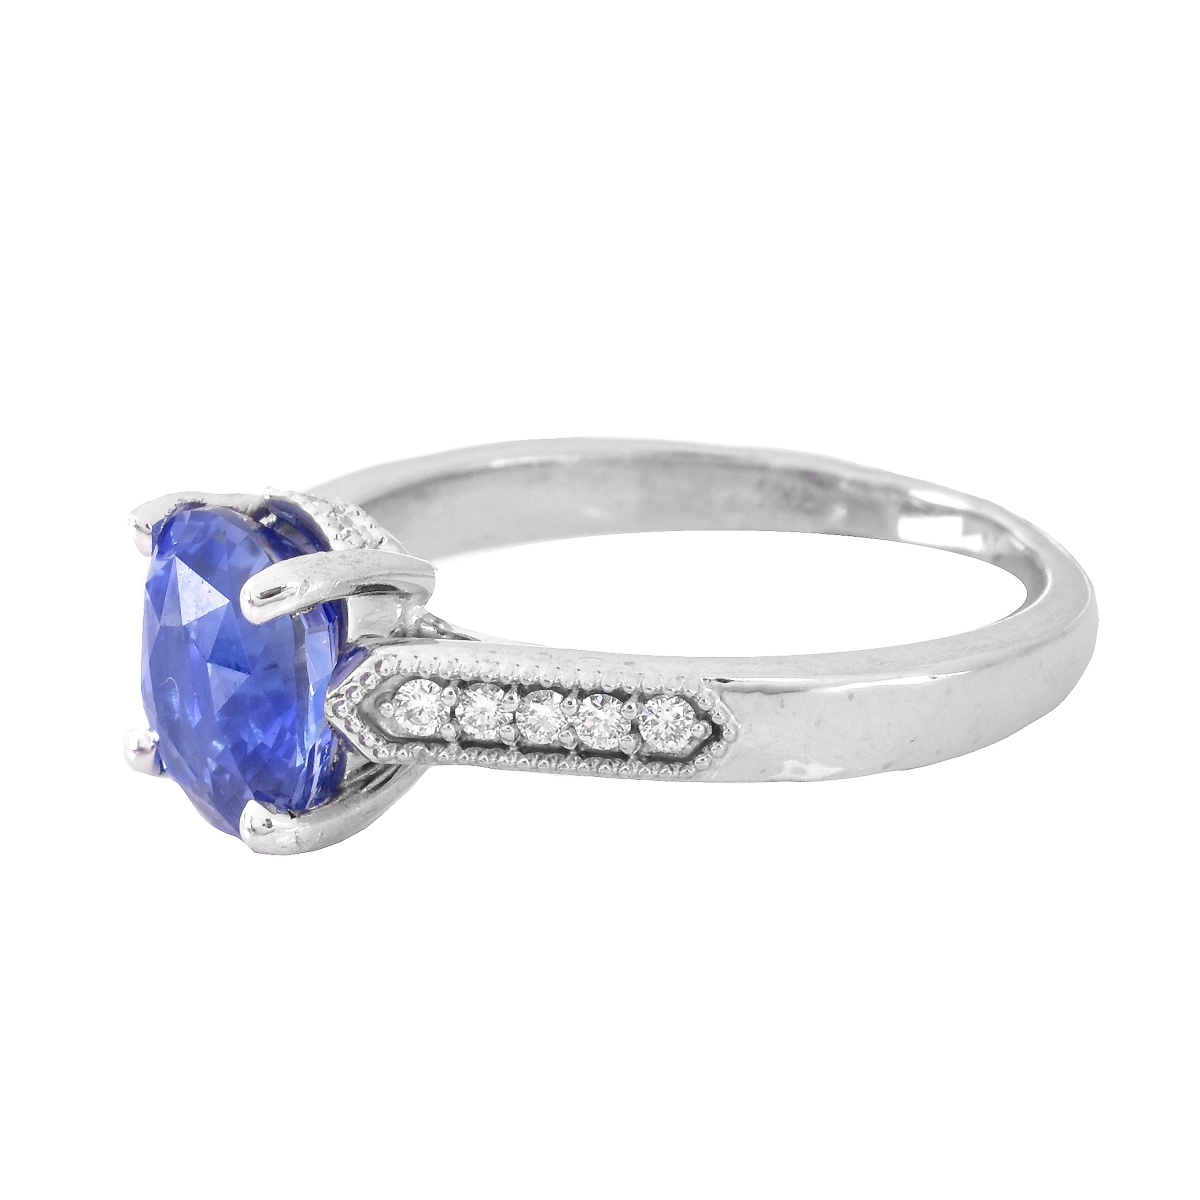 GIA 2.52ct. Sapphire, Diamond and 14K Gold Ring